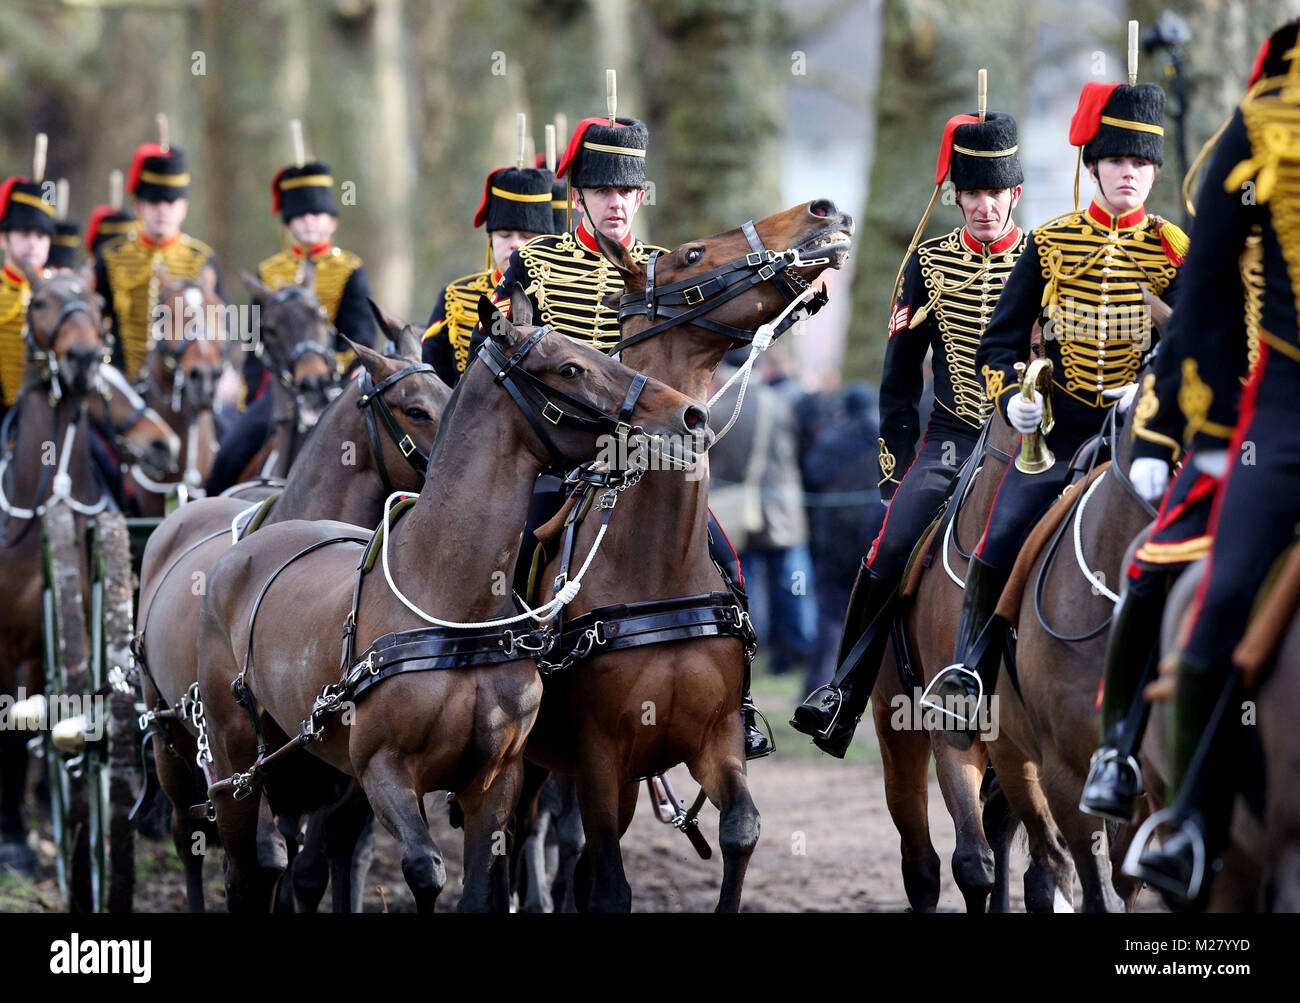 The King's Troop Royal Horse Artillery leave after marking the 66th anniversary of the Queen's accession to the throne with a 41 Gun Royal Salute in Hyde Park, London. Stock Photo